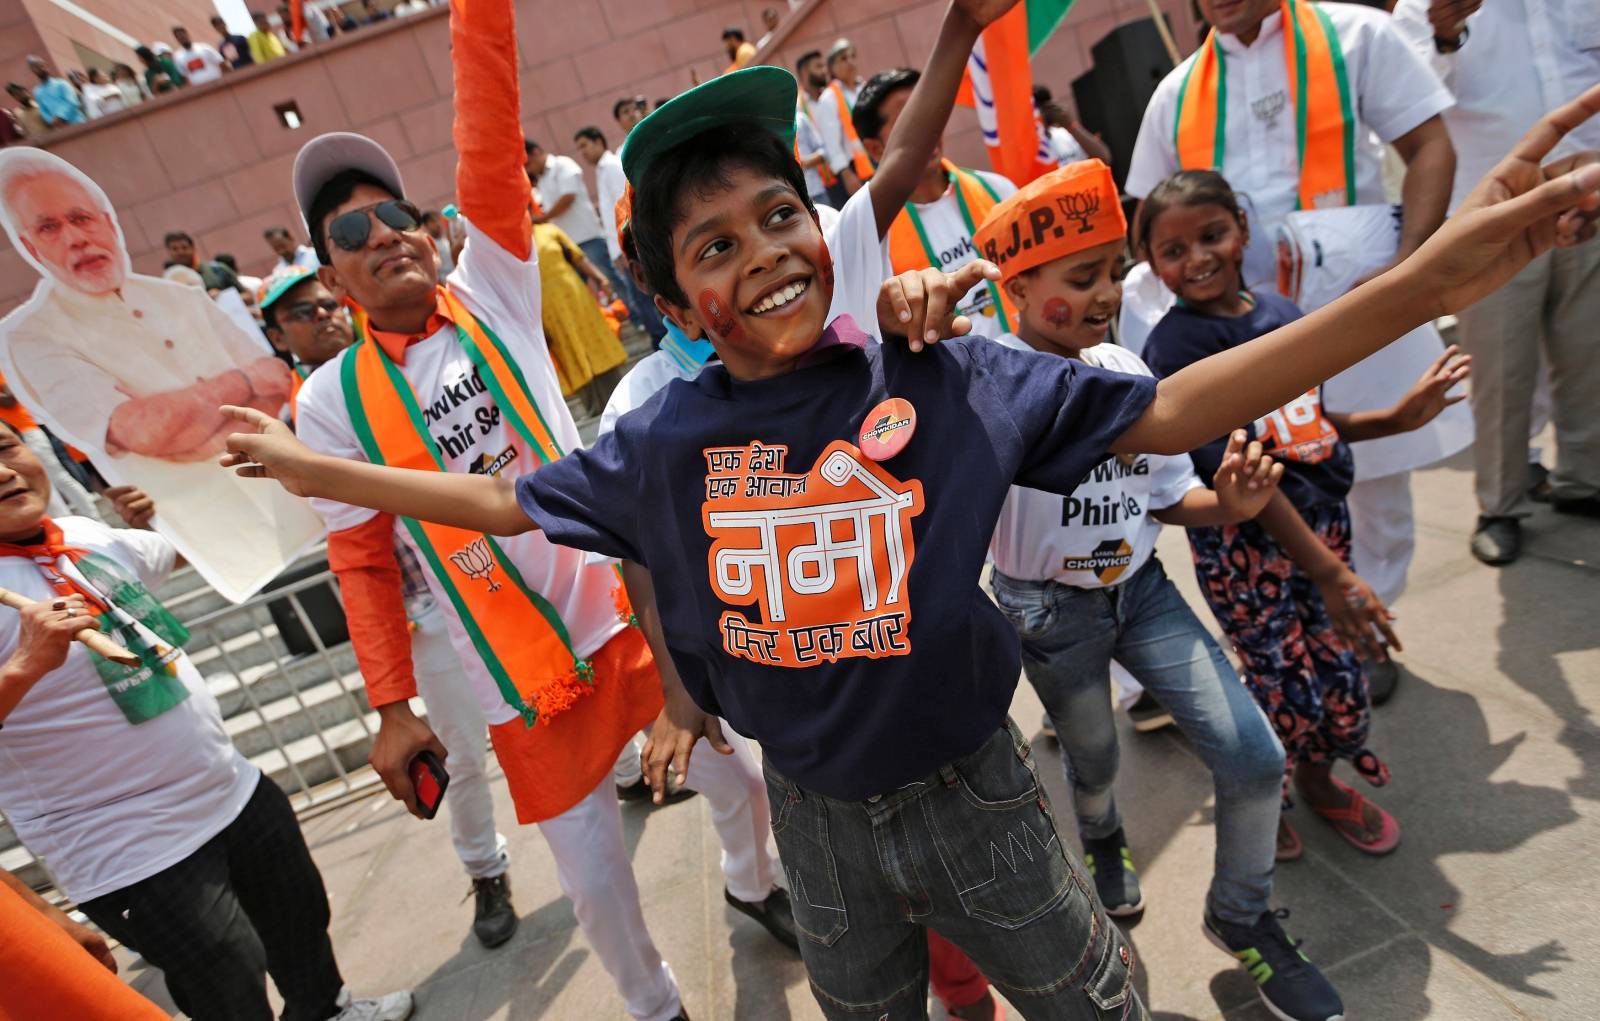 Bharatiya Janata Party (BJP) supporters celebrate after learning the election results at party headquarters in New Delhi